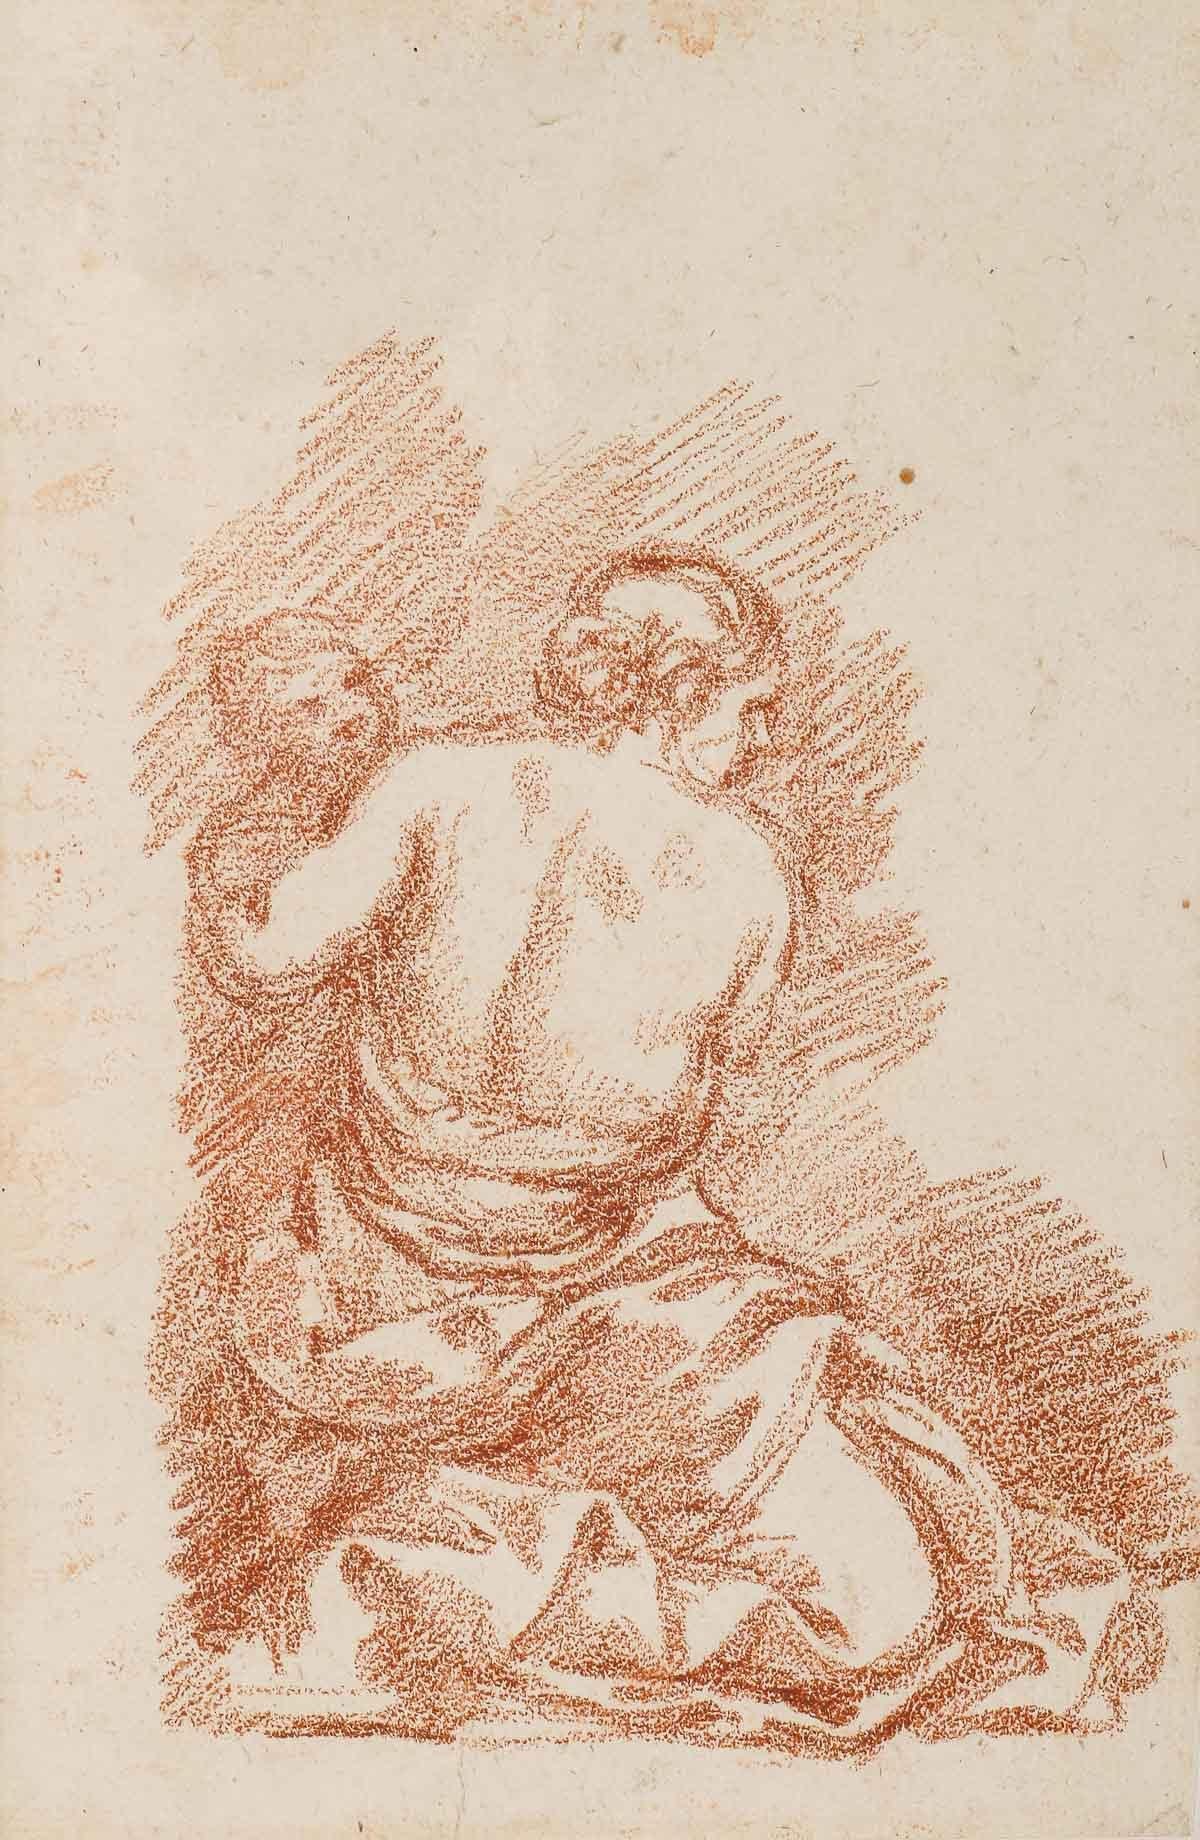 Sanguine on Paper by Jean Robert Ango (1710-1773), XVIIIth Century.

Sanguine, drawing of a woman with her child on framed paper from the 18th century by Jean Robert Ango .

Drawing: H: 27.8cm, W: 20.5cm
Frame: H: 35.5cm, W: 30cm, D: 1cm